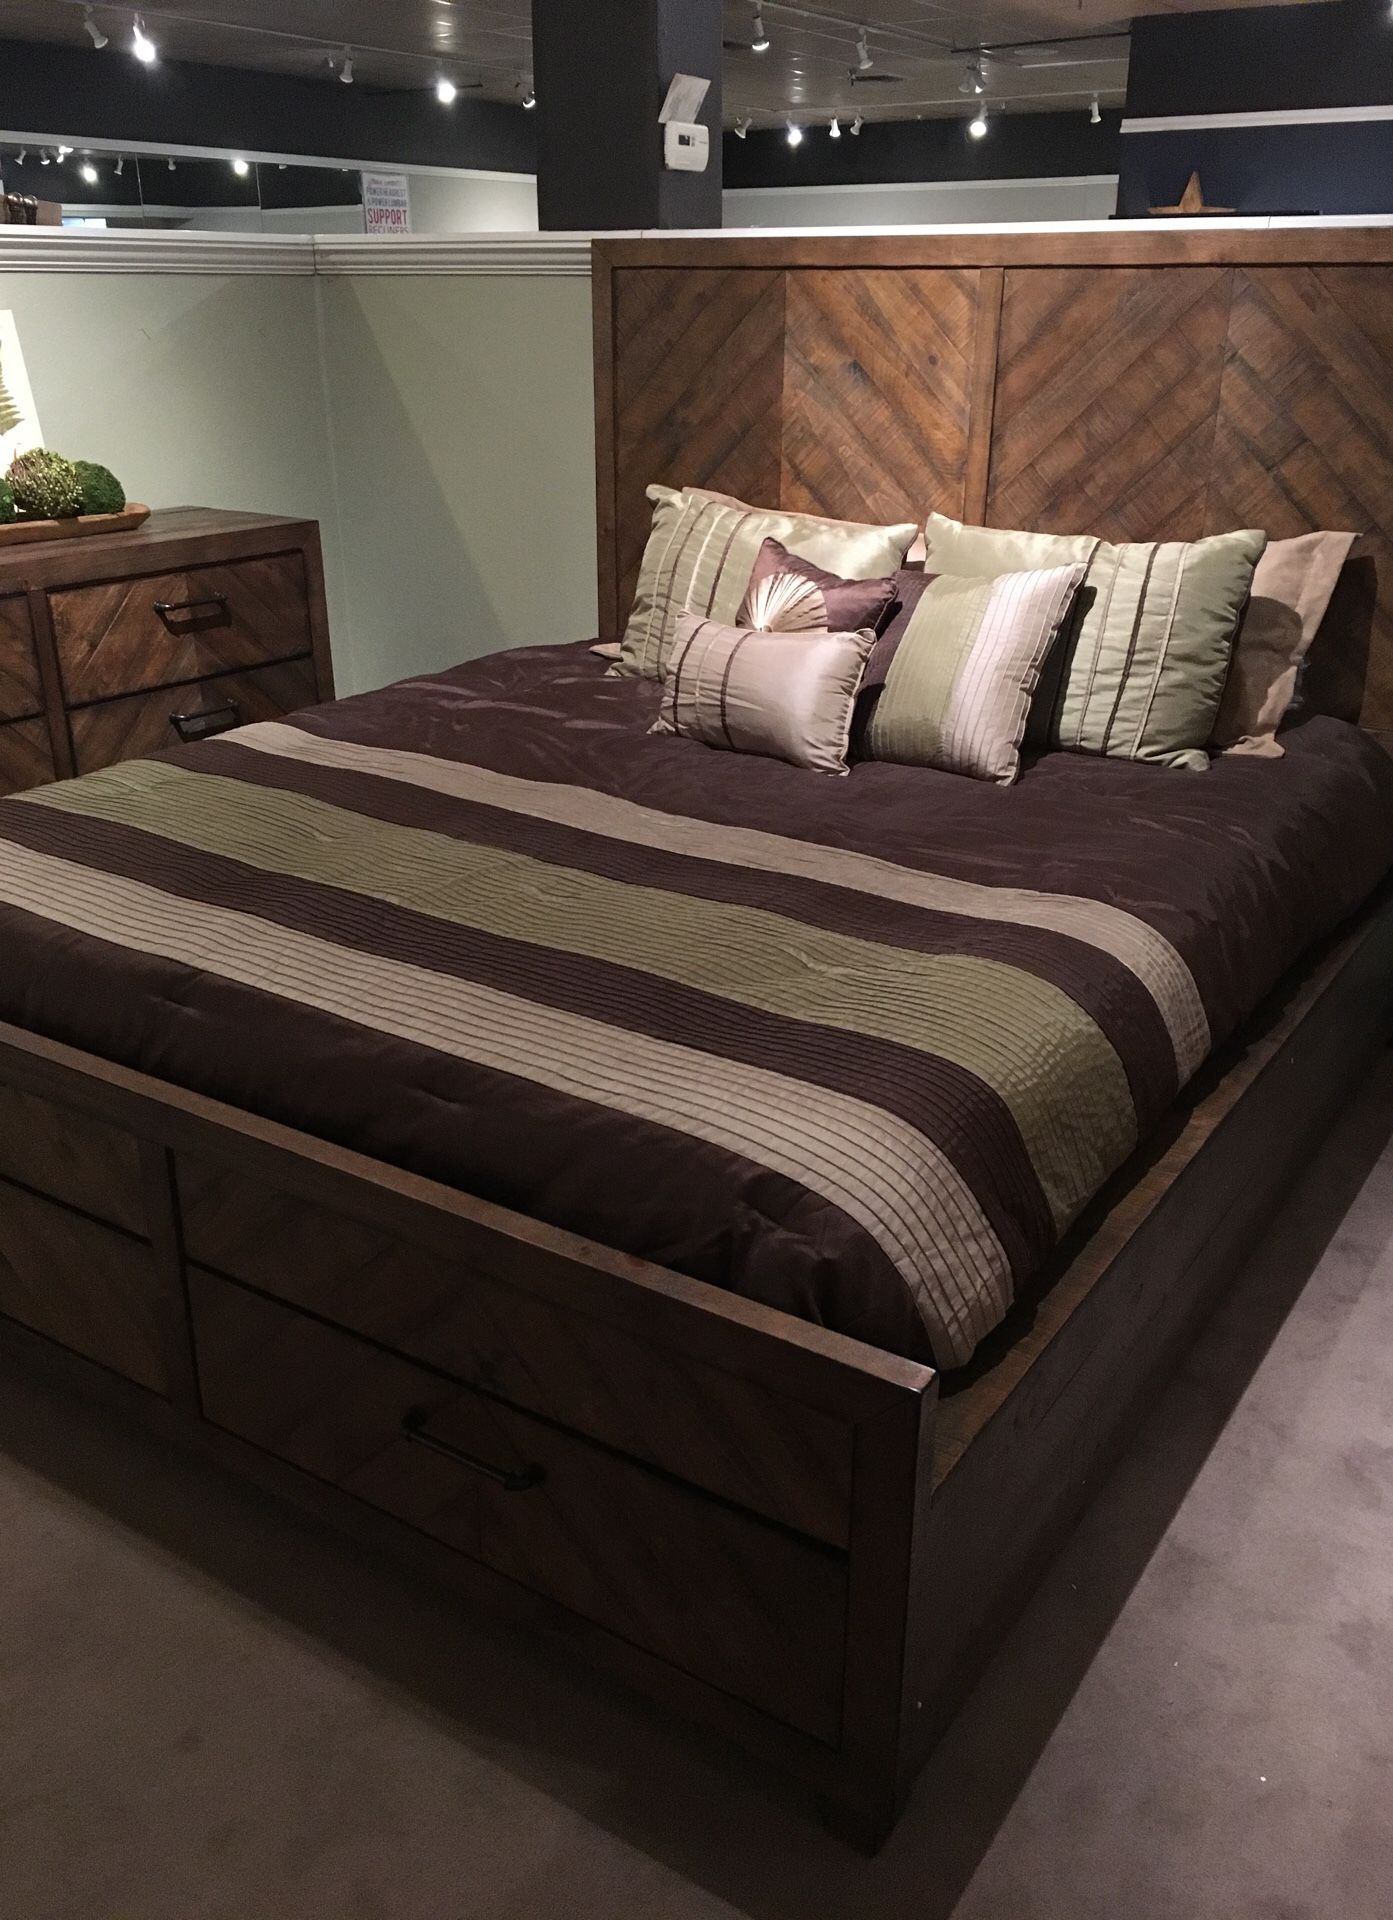 Four piece king size bed